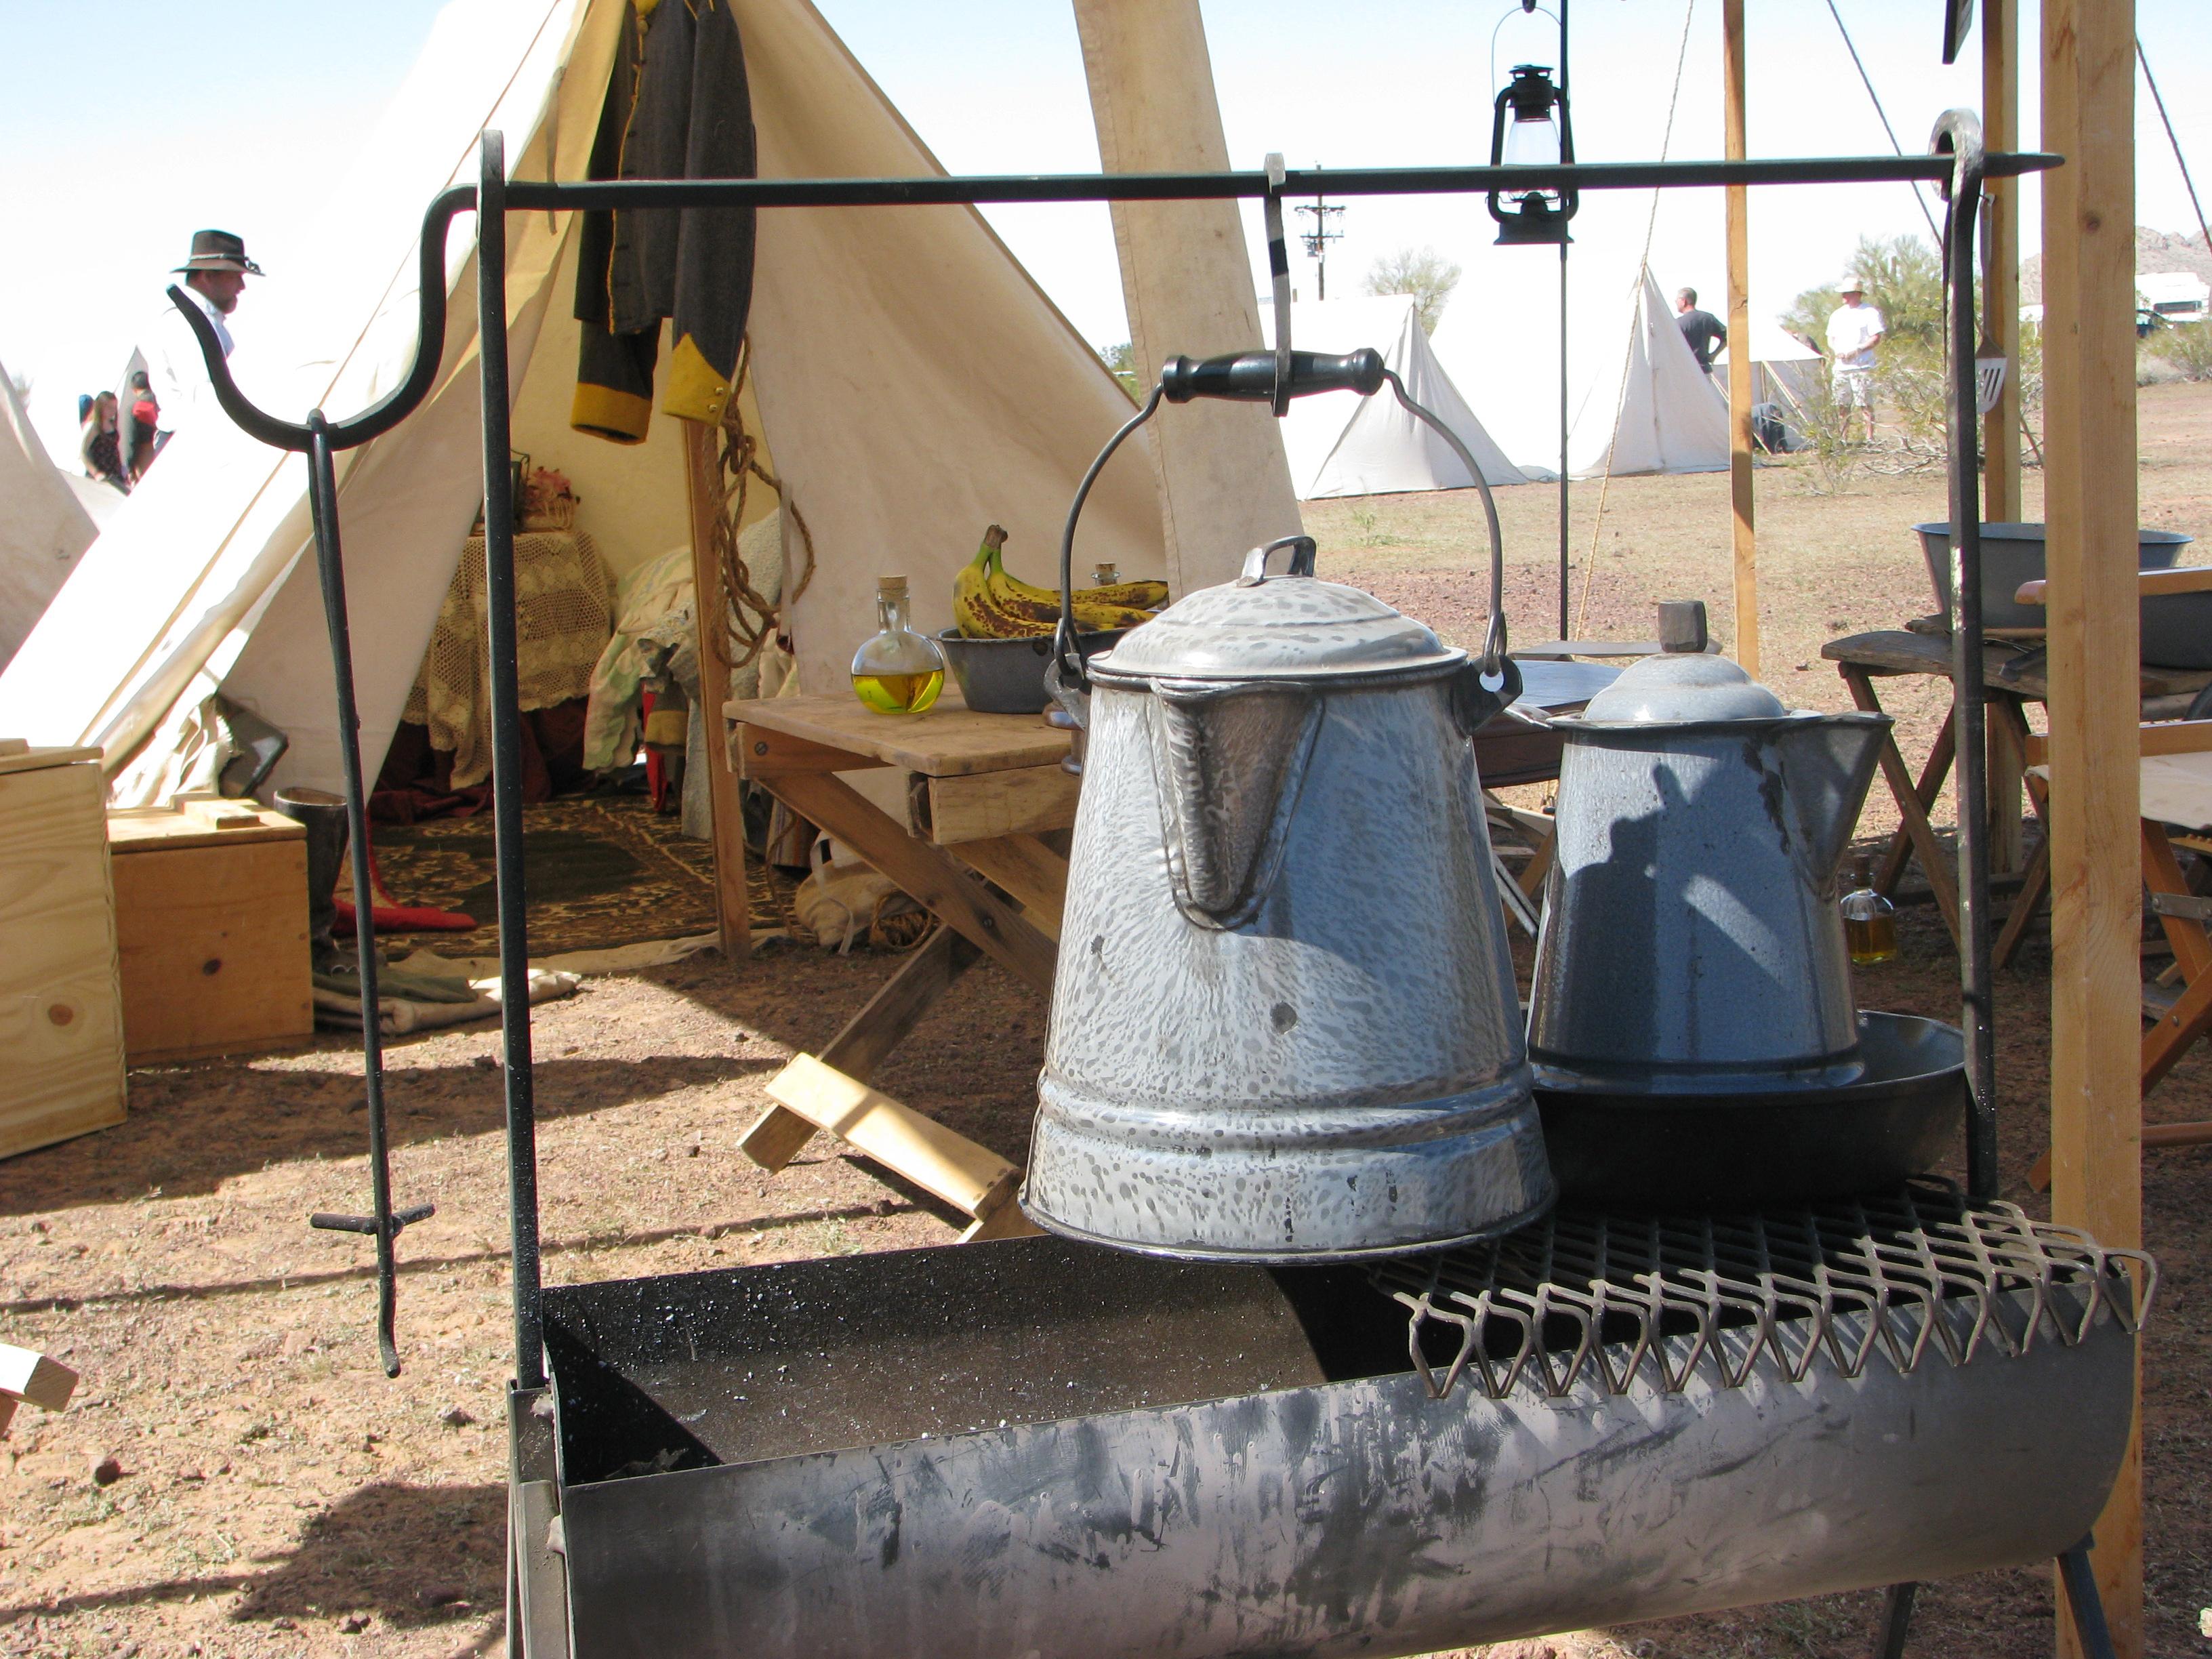 Coffee pots used at Picacho re-enactment